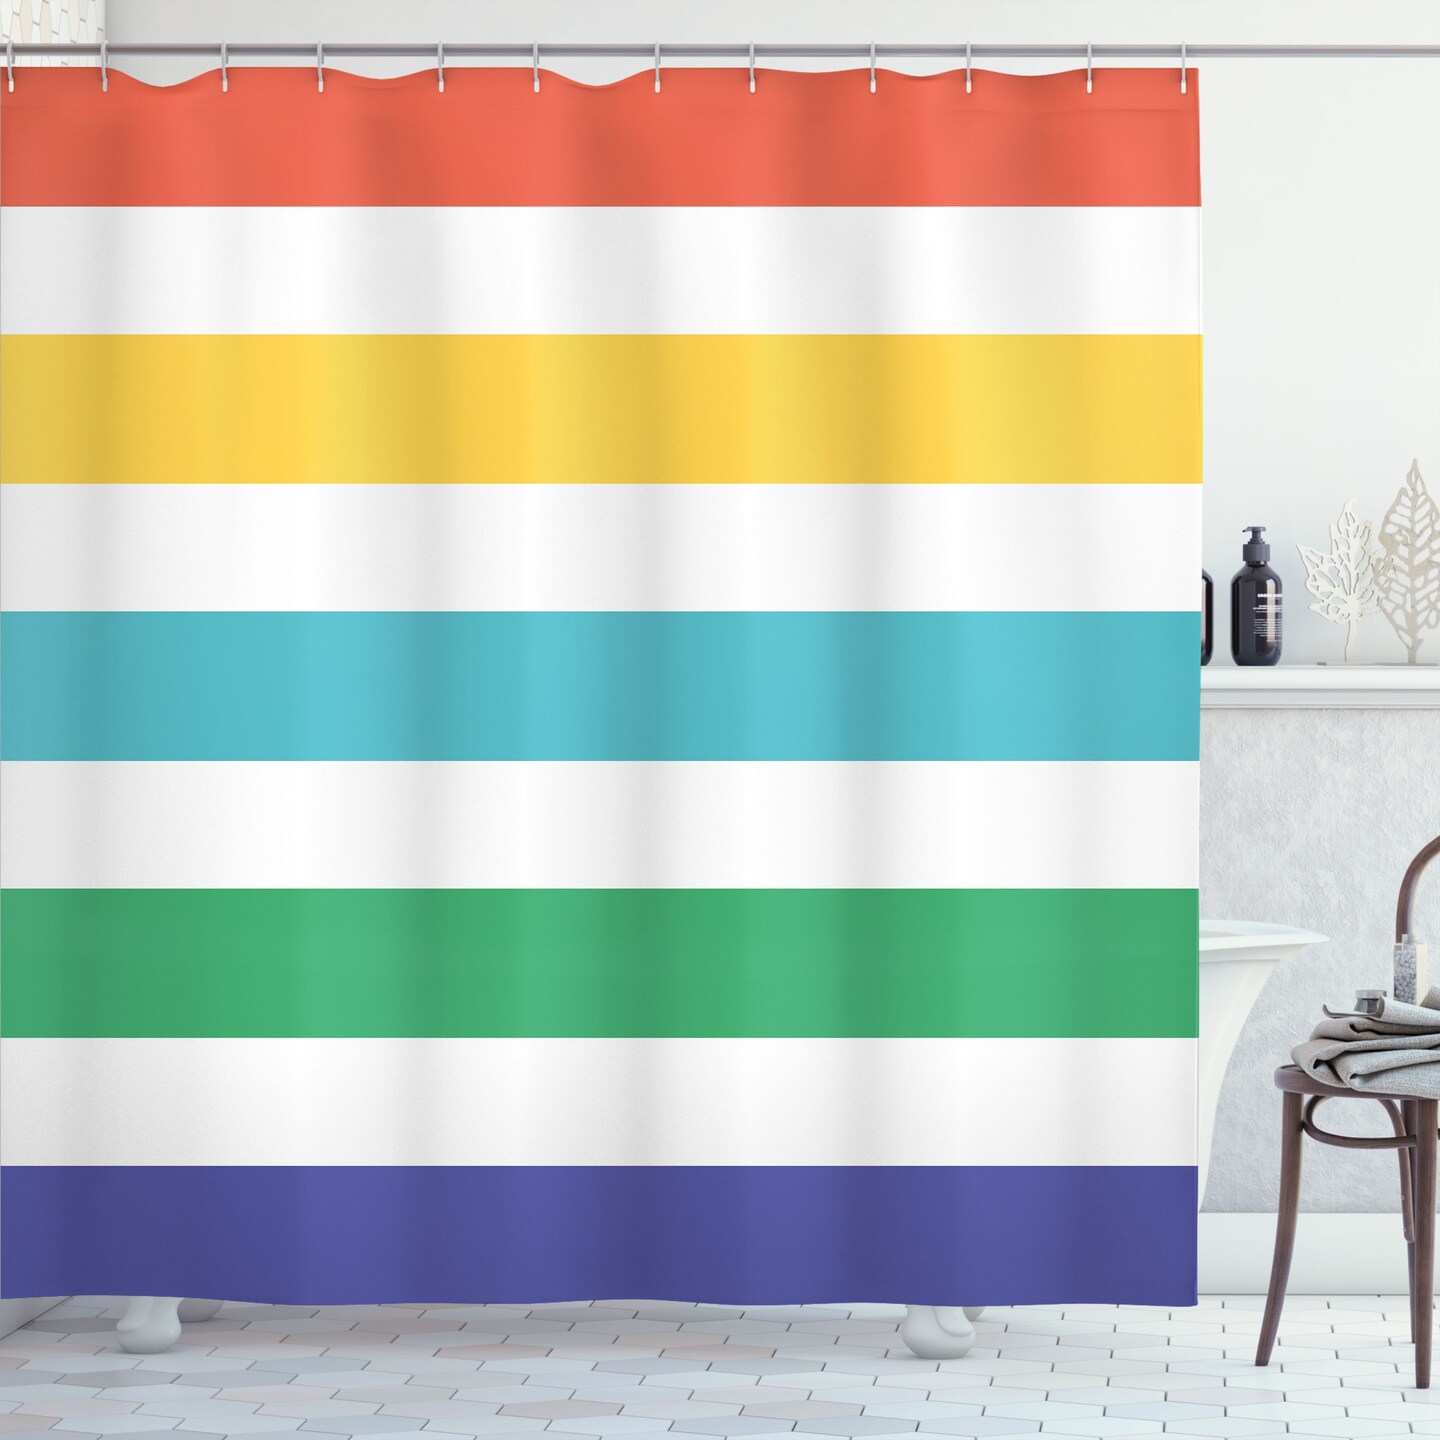 Ambesonne Striped Shower Curtain, Rainbow Colored and White Fun Horizontal  Lines Room Red Yellow Blue Green Art, Cloth Fabric Bathroom Decor Set with  Hooks, 69 W x 70 L, White Mustard Jade